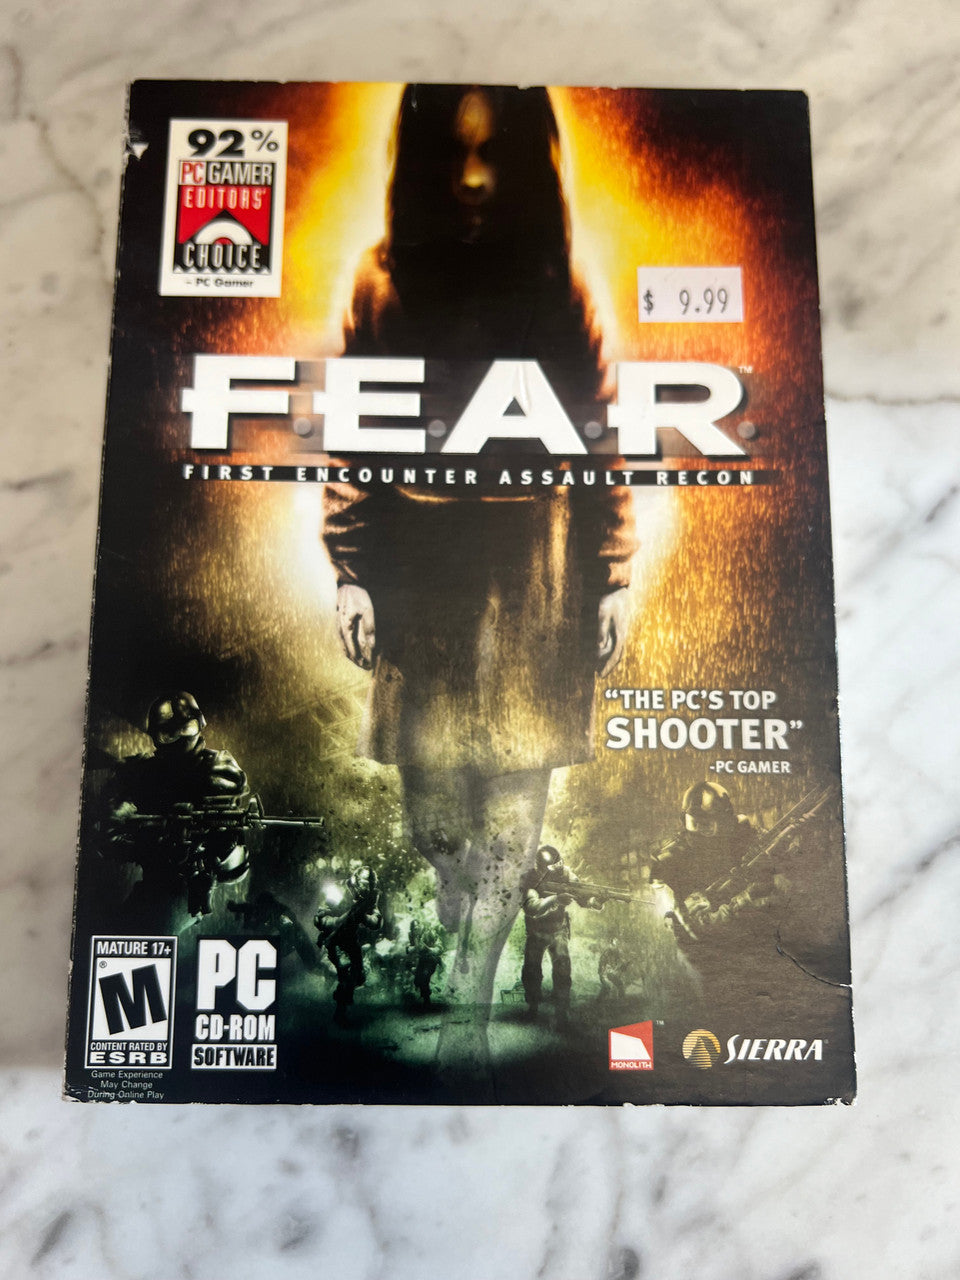 FEAR First Encounter Assault Recon (PC, 2005) Complete 5 Disc Boxed Set w/ Book